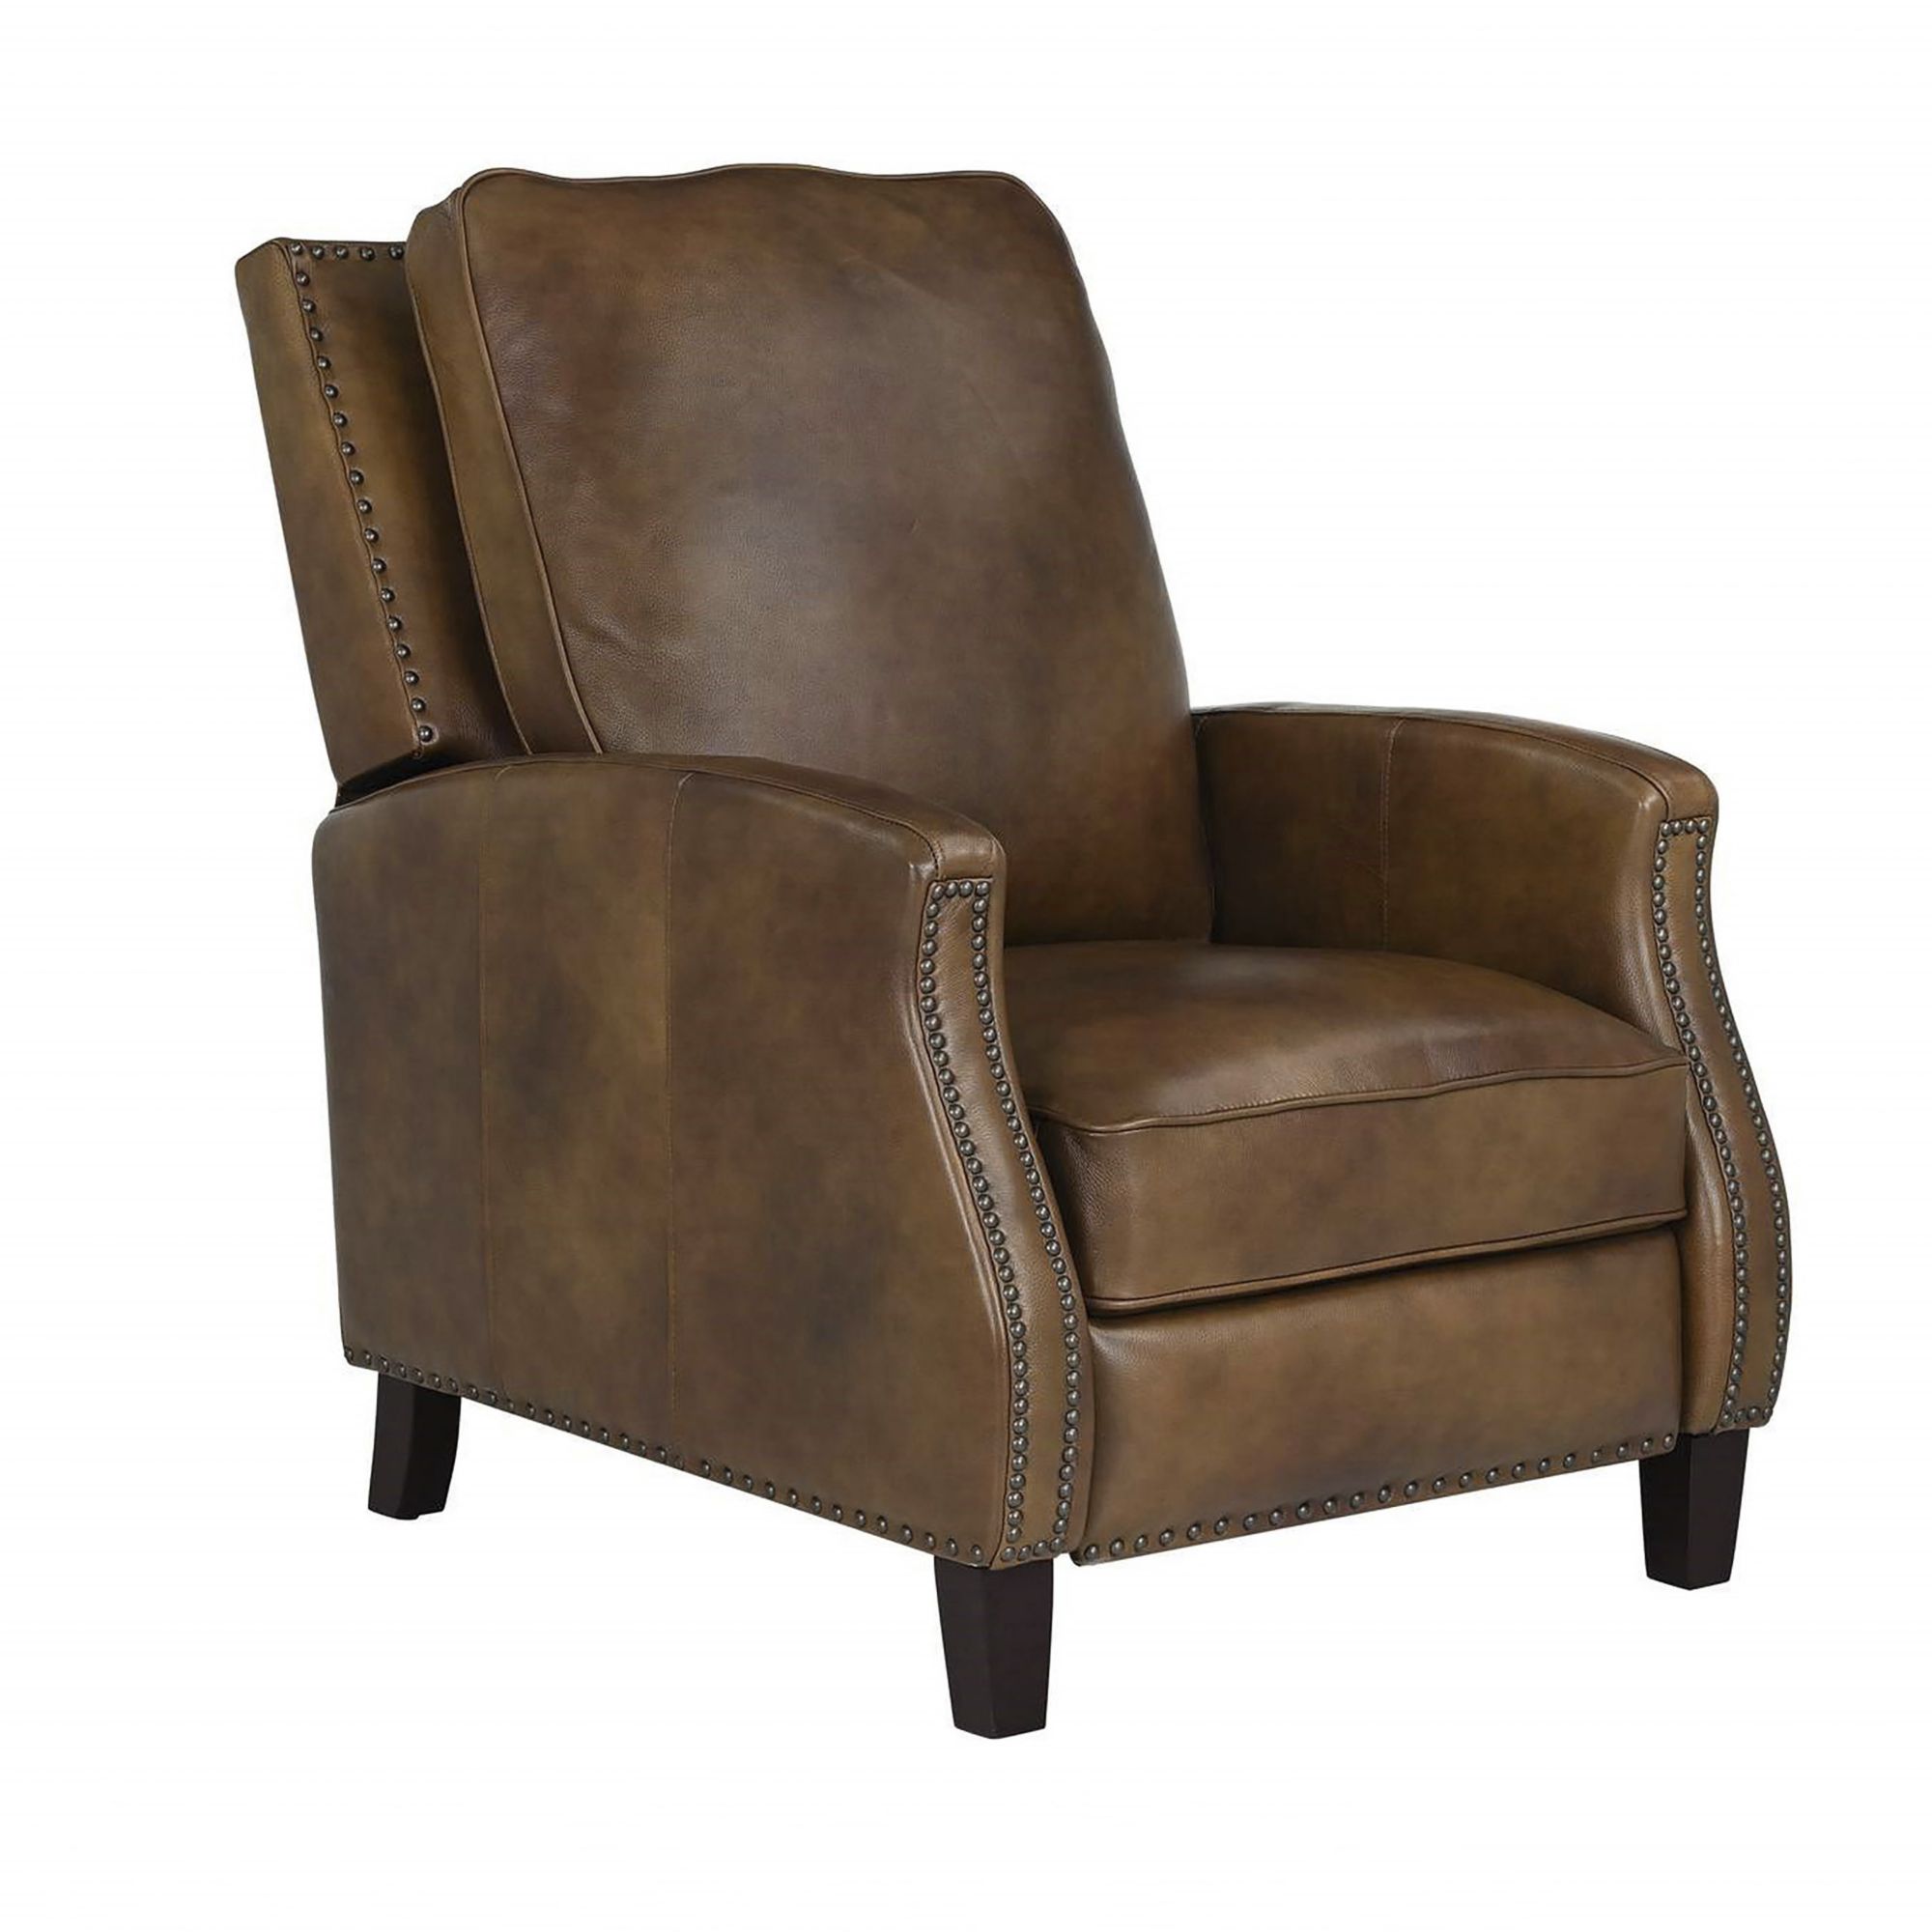 Henglin Leather Match Pushback Recliner - Saddle Brown